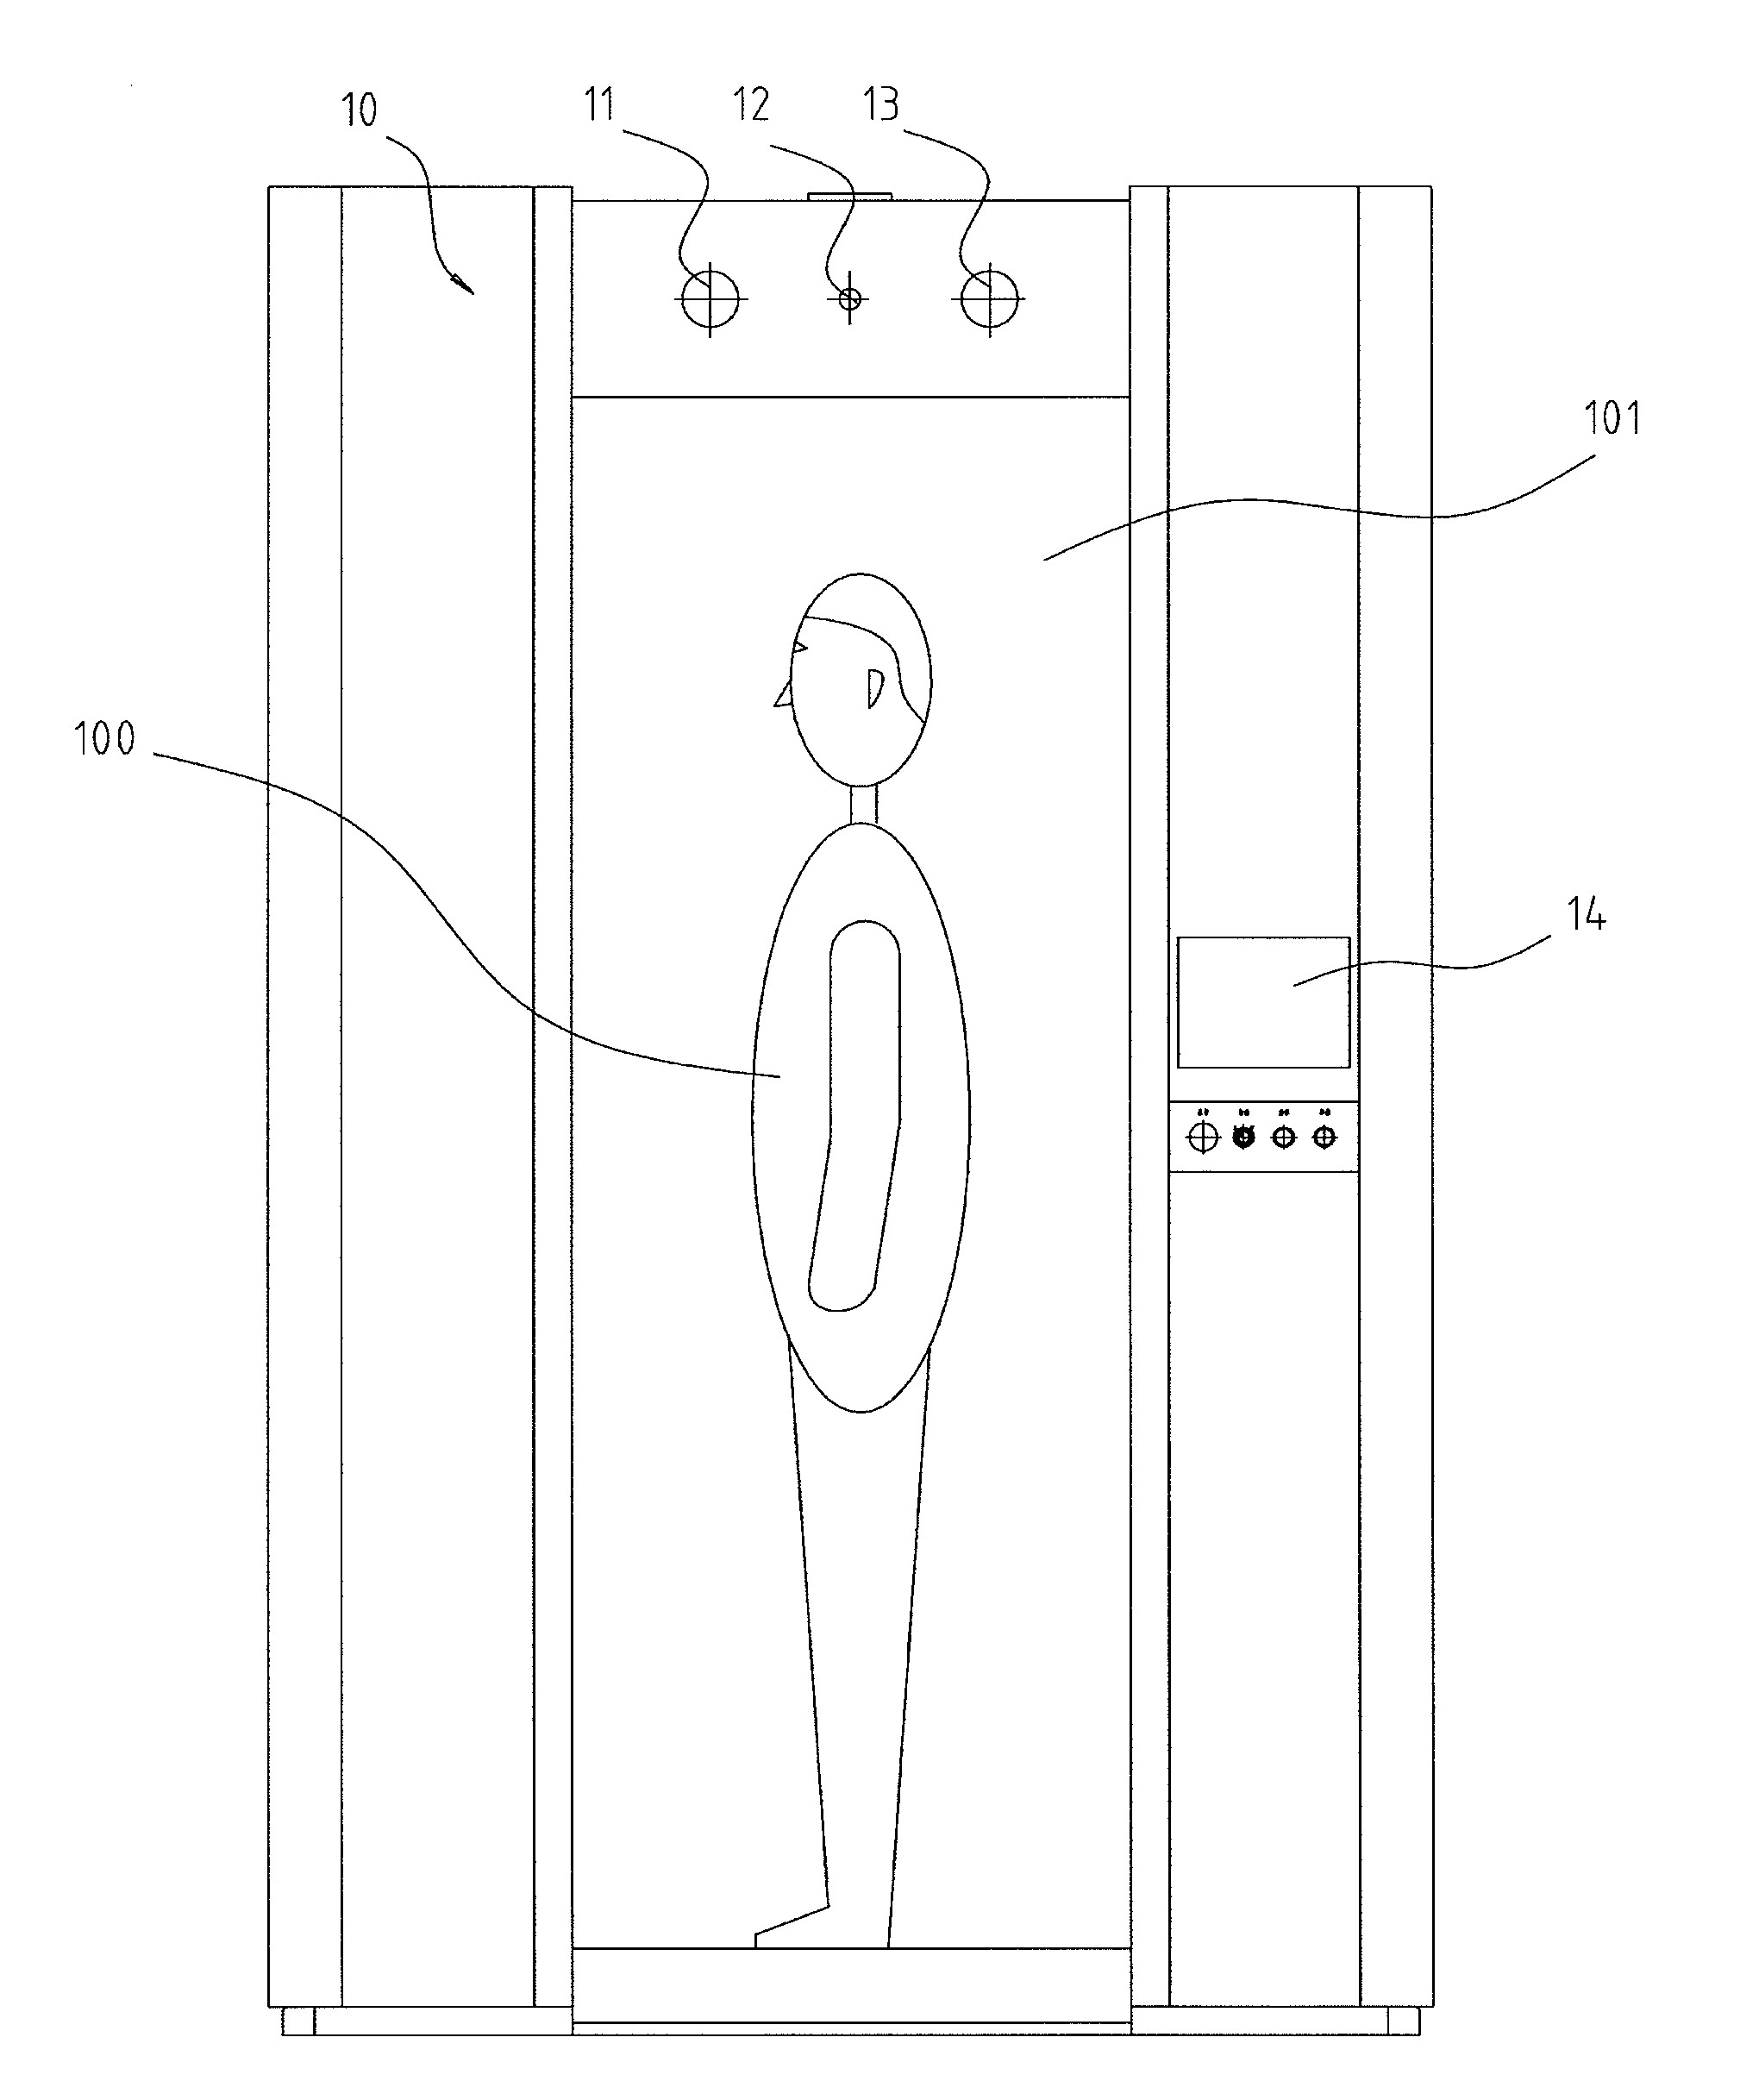 Millimeter wave holographic scan imaging apparatus for human body security inspection